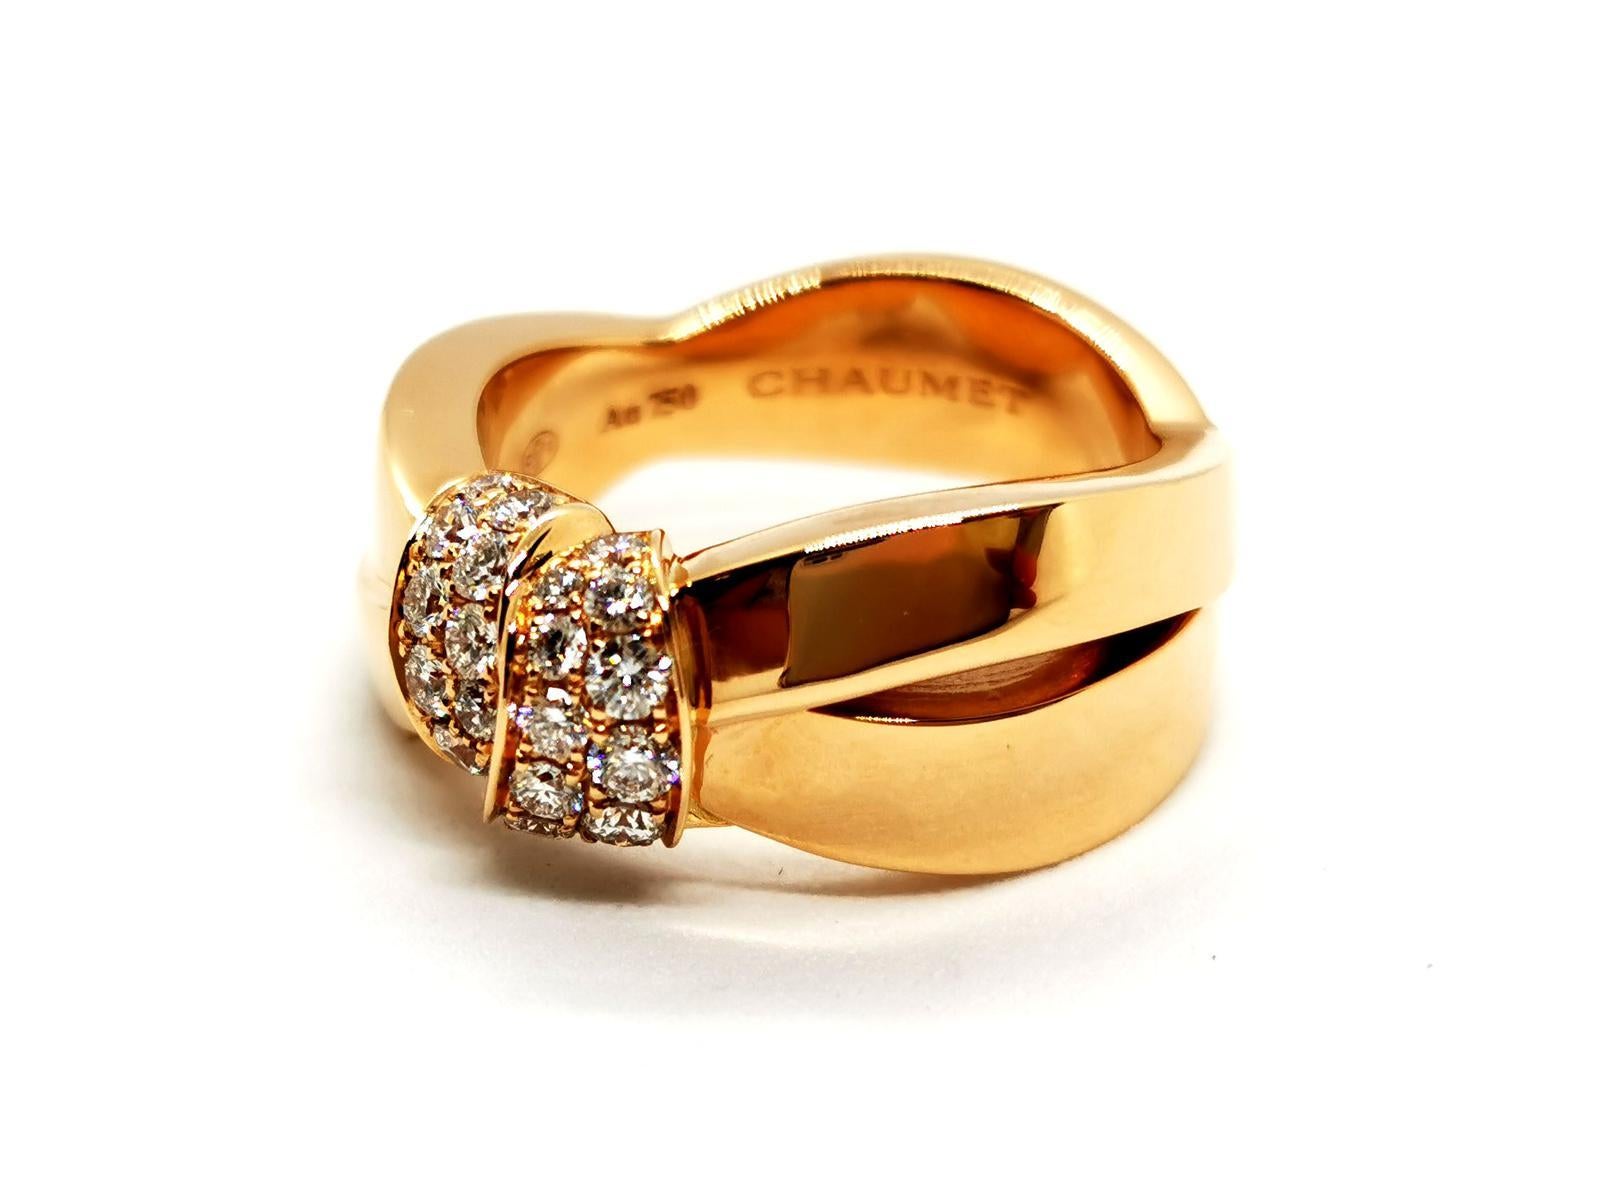 chaumet rose gold wedding bands